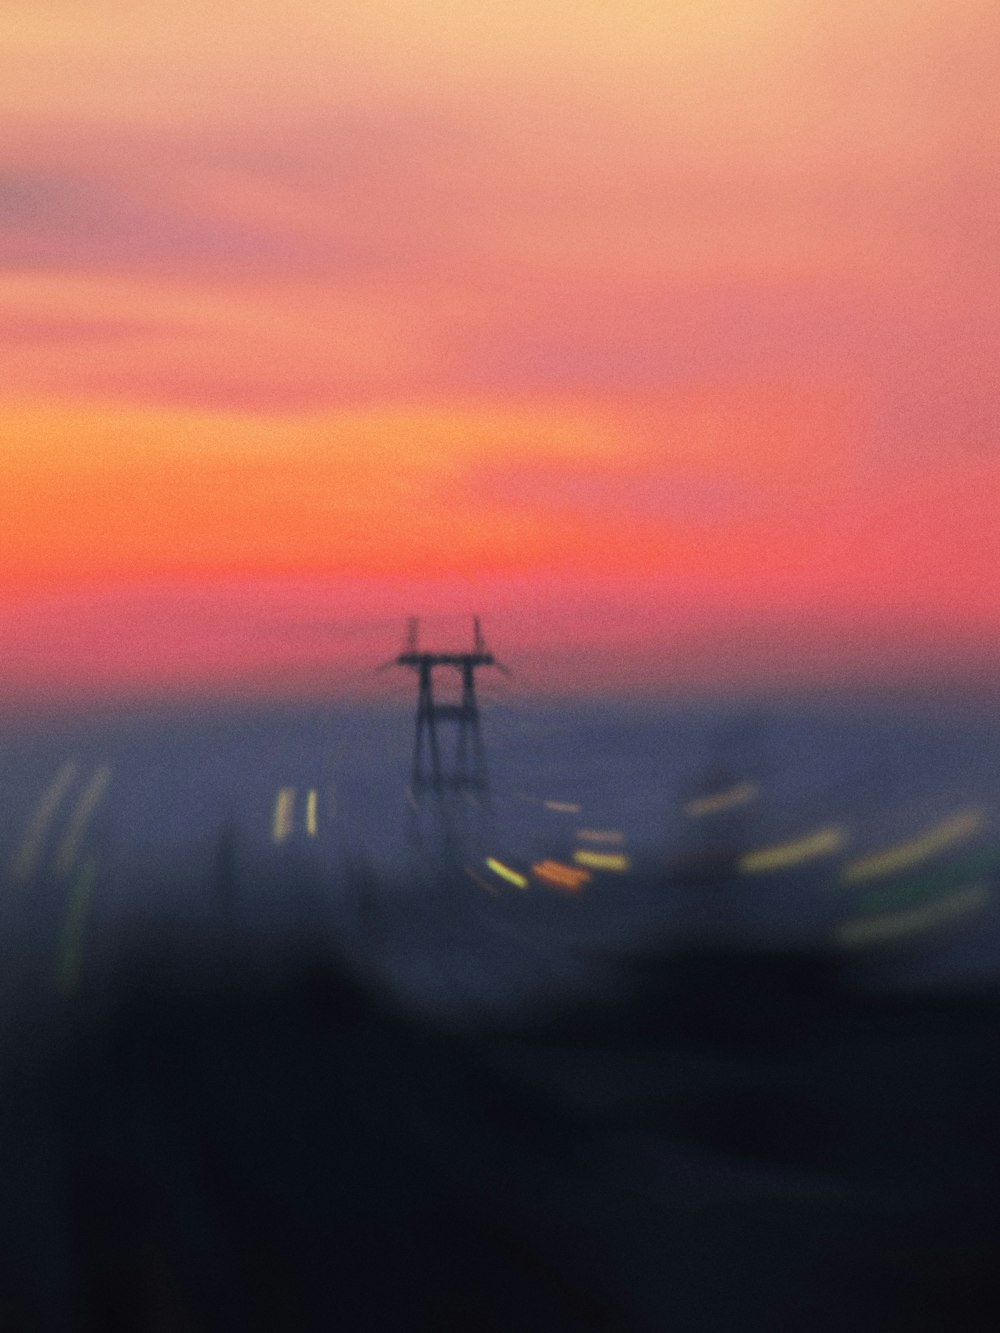 a blurry photo of a windmill in the distance